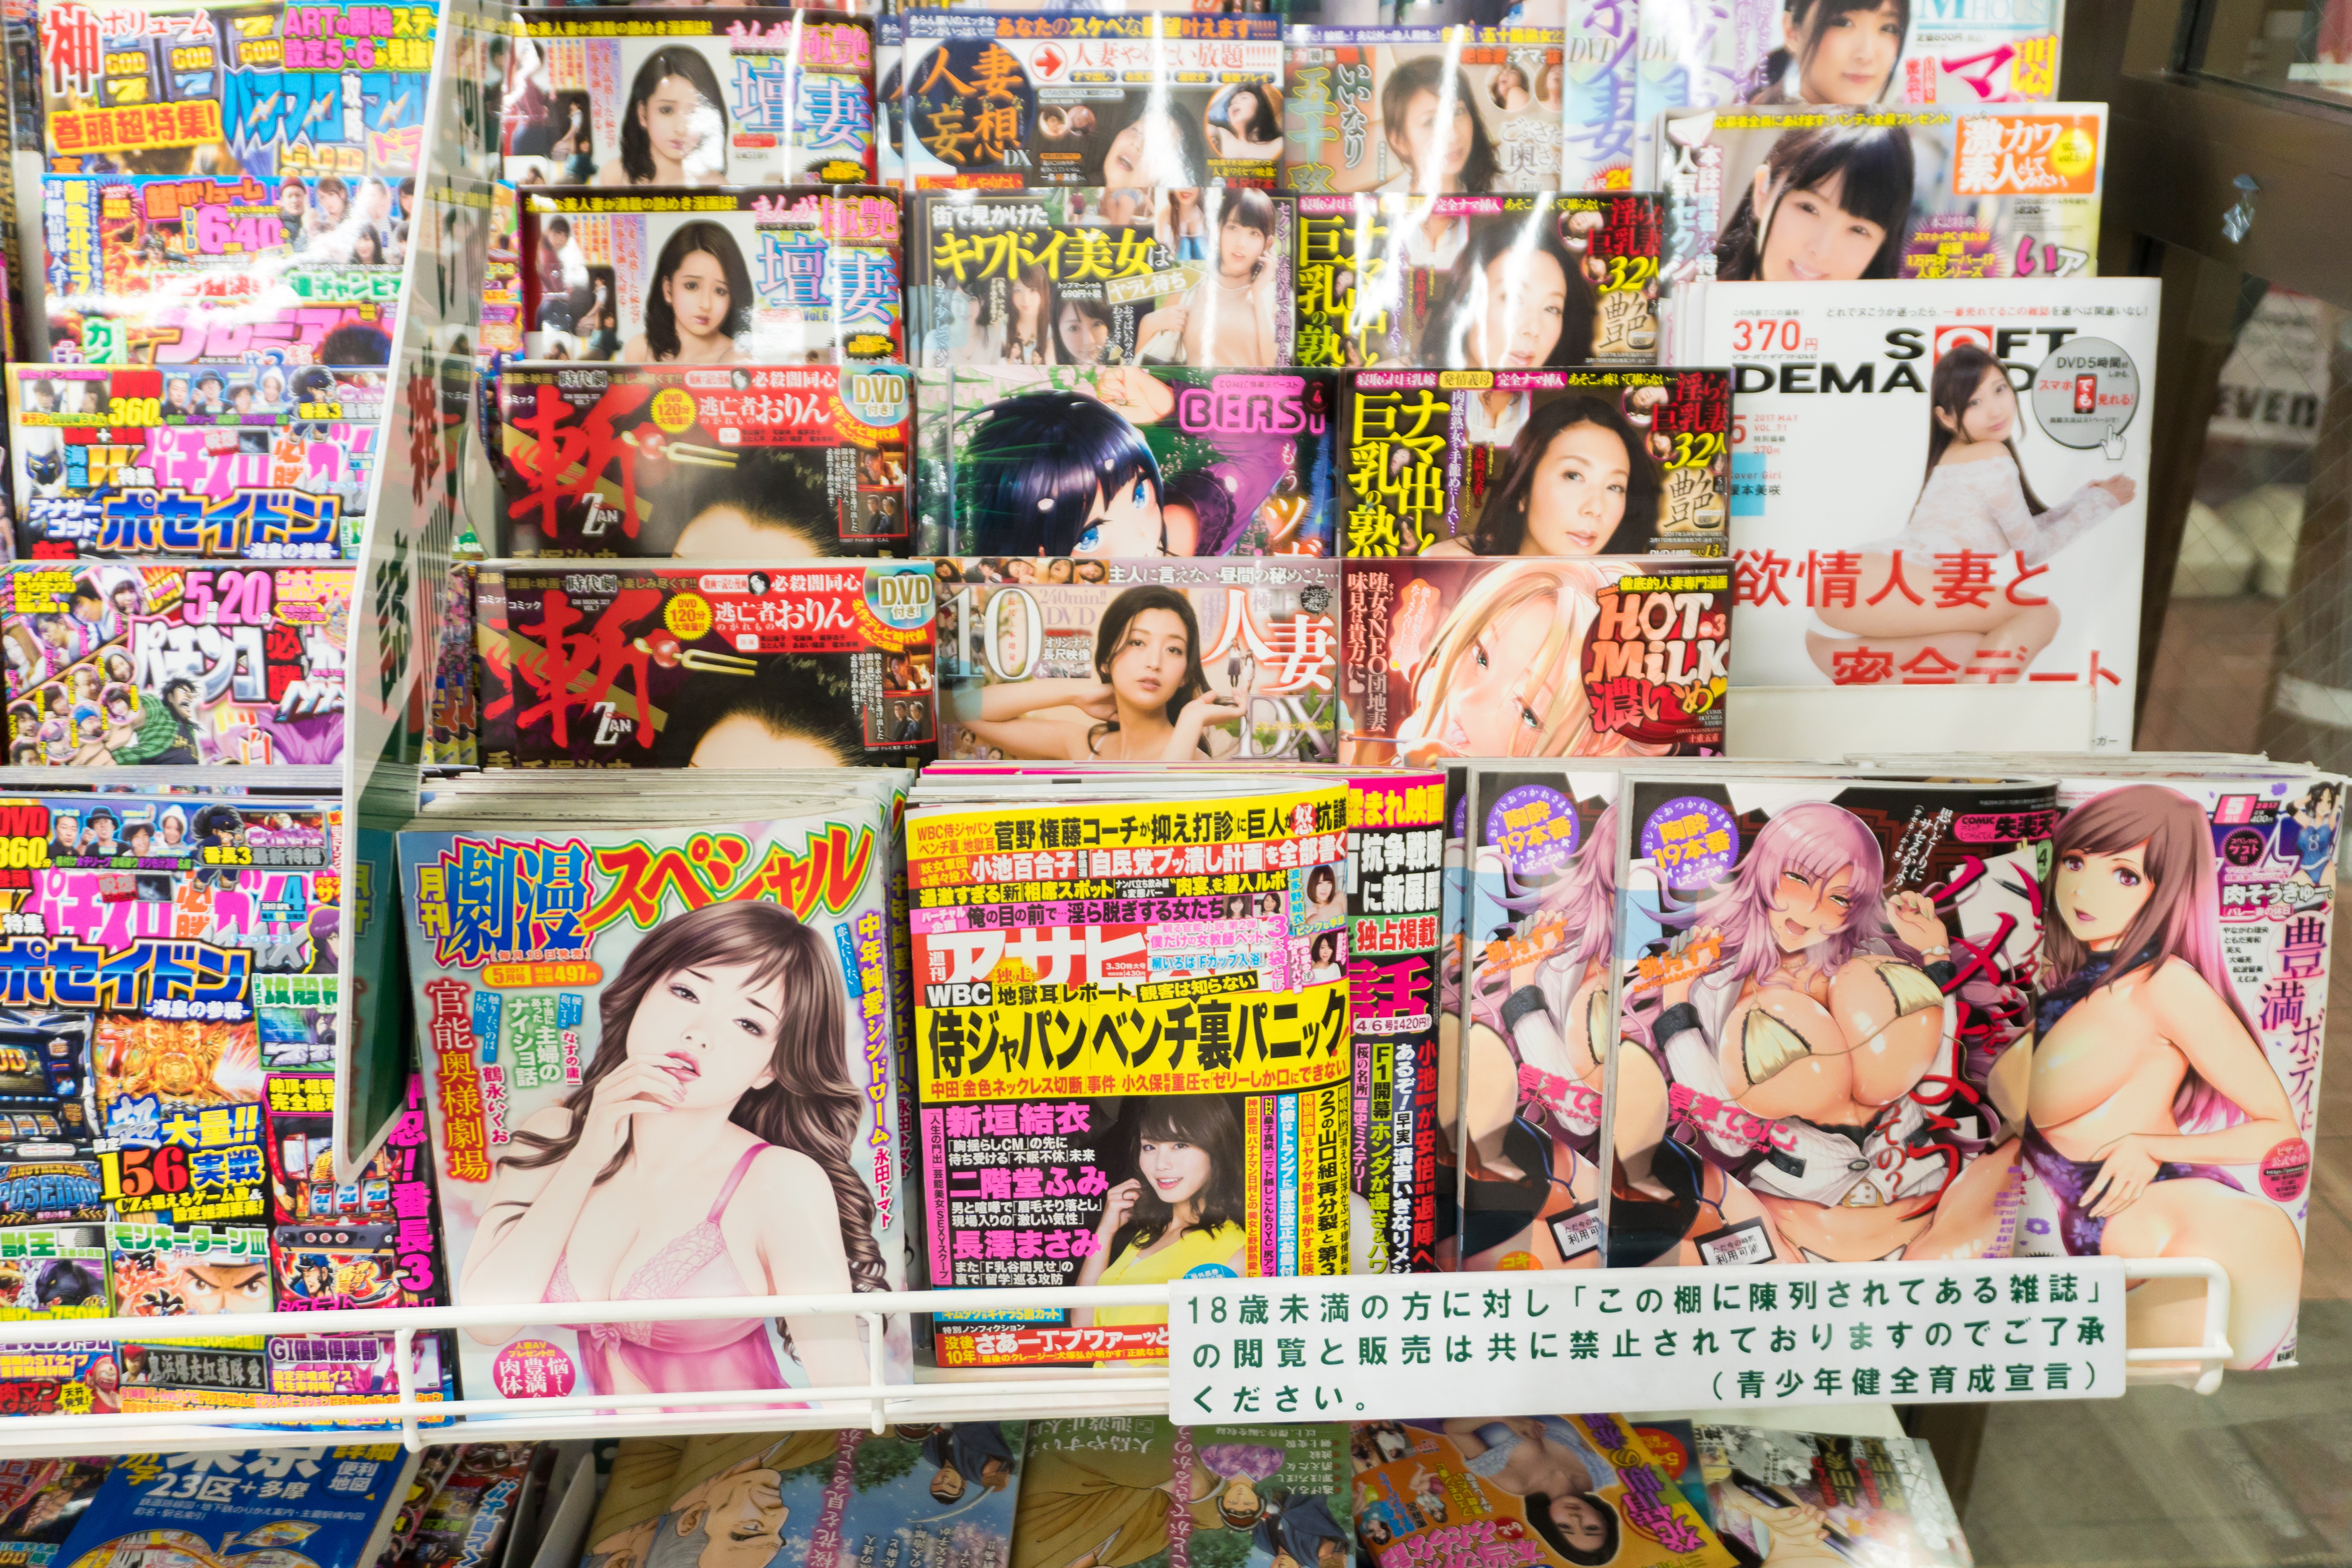 Opinion: Porn free: Japan to take adult magazines off convenience-store  shelves ahead of Tokyo Olympics | South China Morning Post